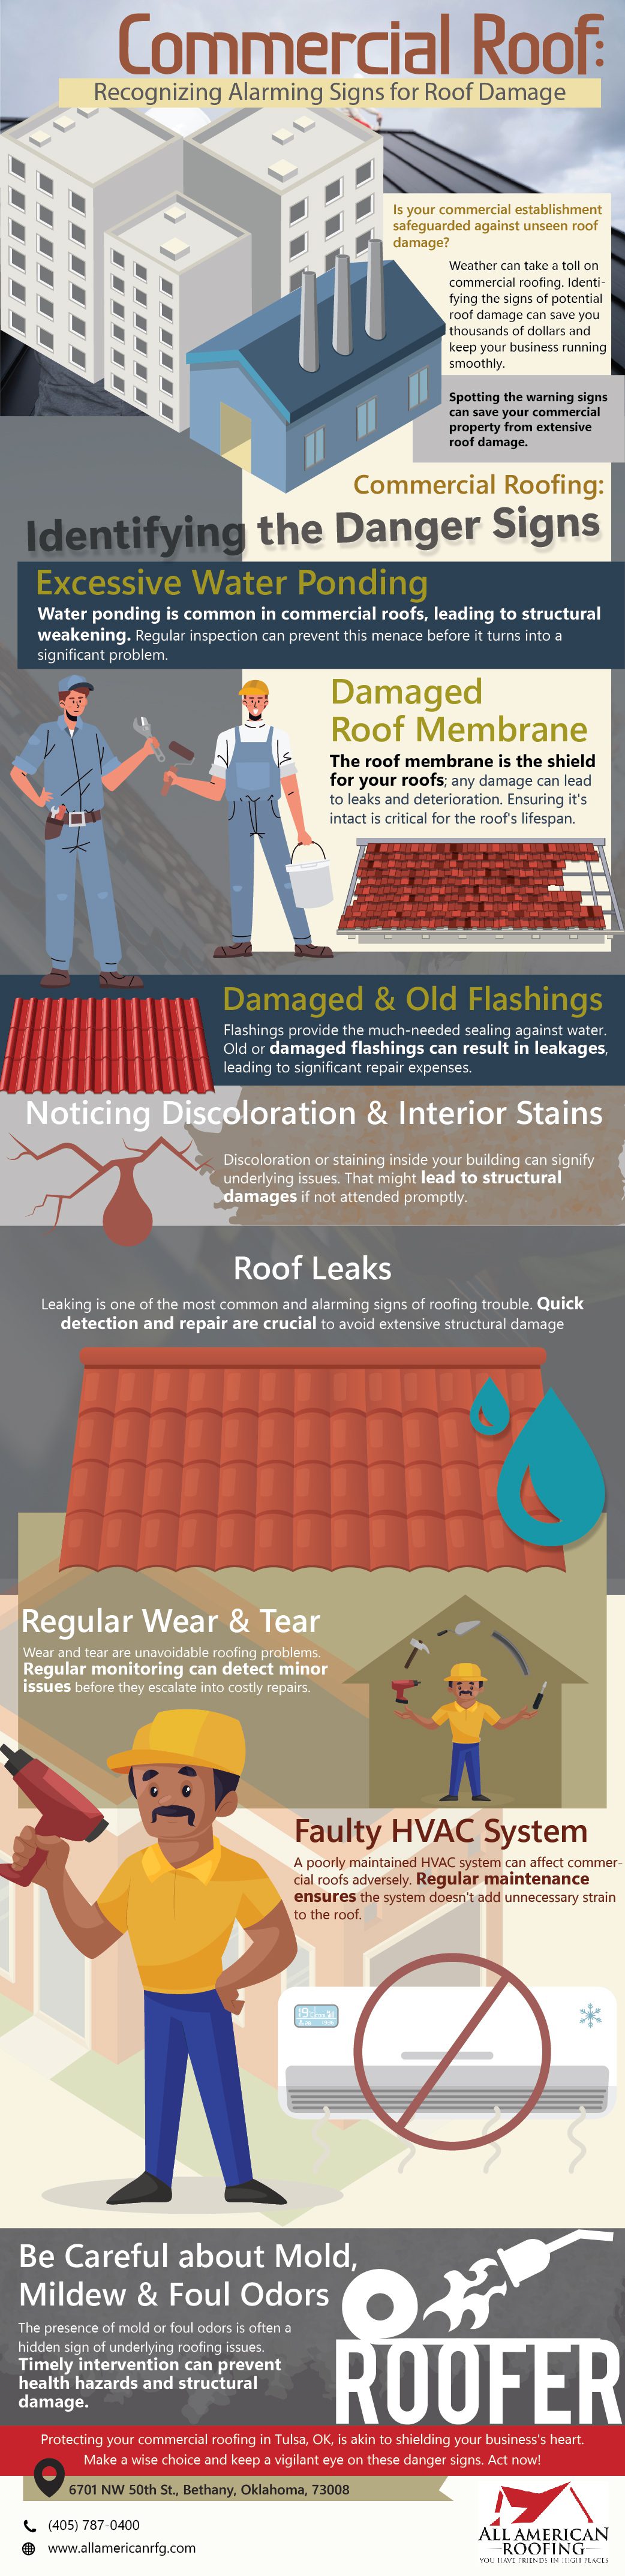 Infographic on commercial roofing tulsa from all american roofing